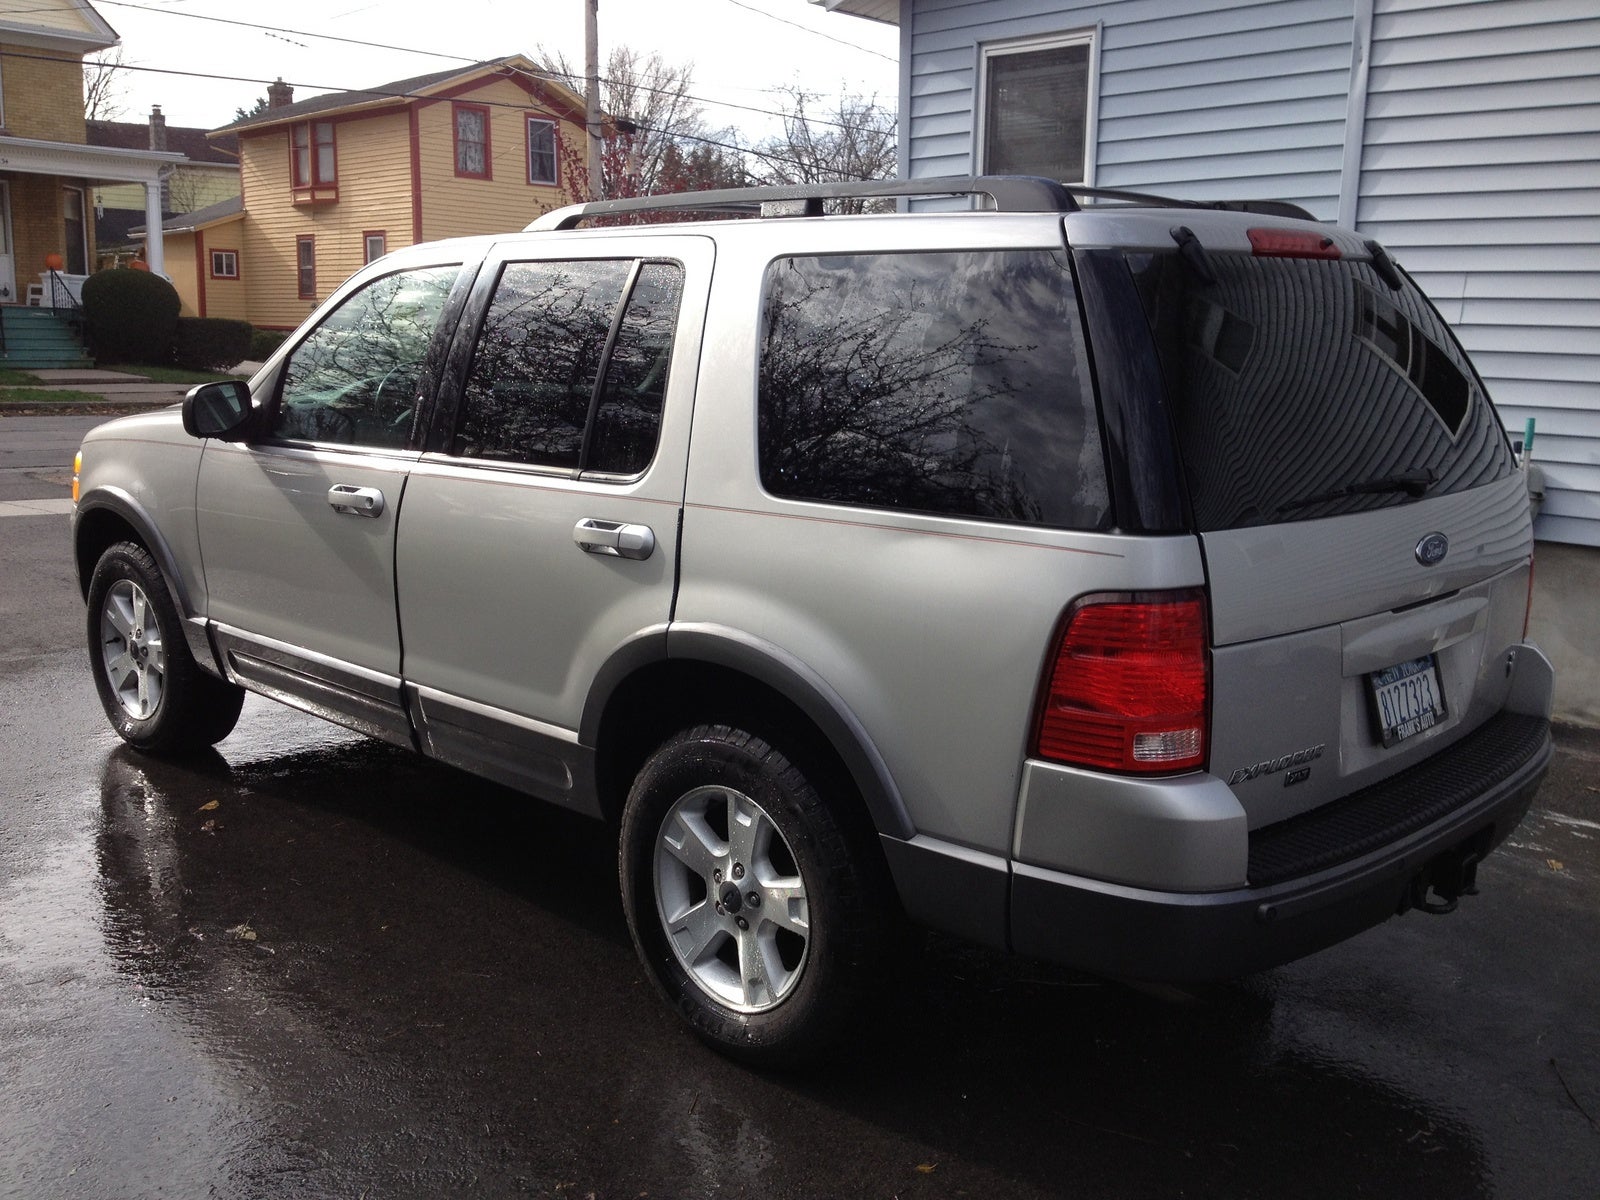 2004 Ford explorer xlt v8 towing capacity 2004 Ford Explorer 4.0 Towing Capacity